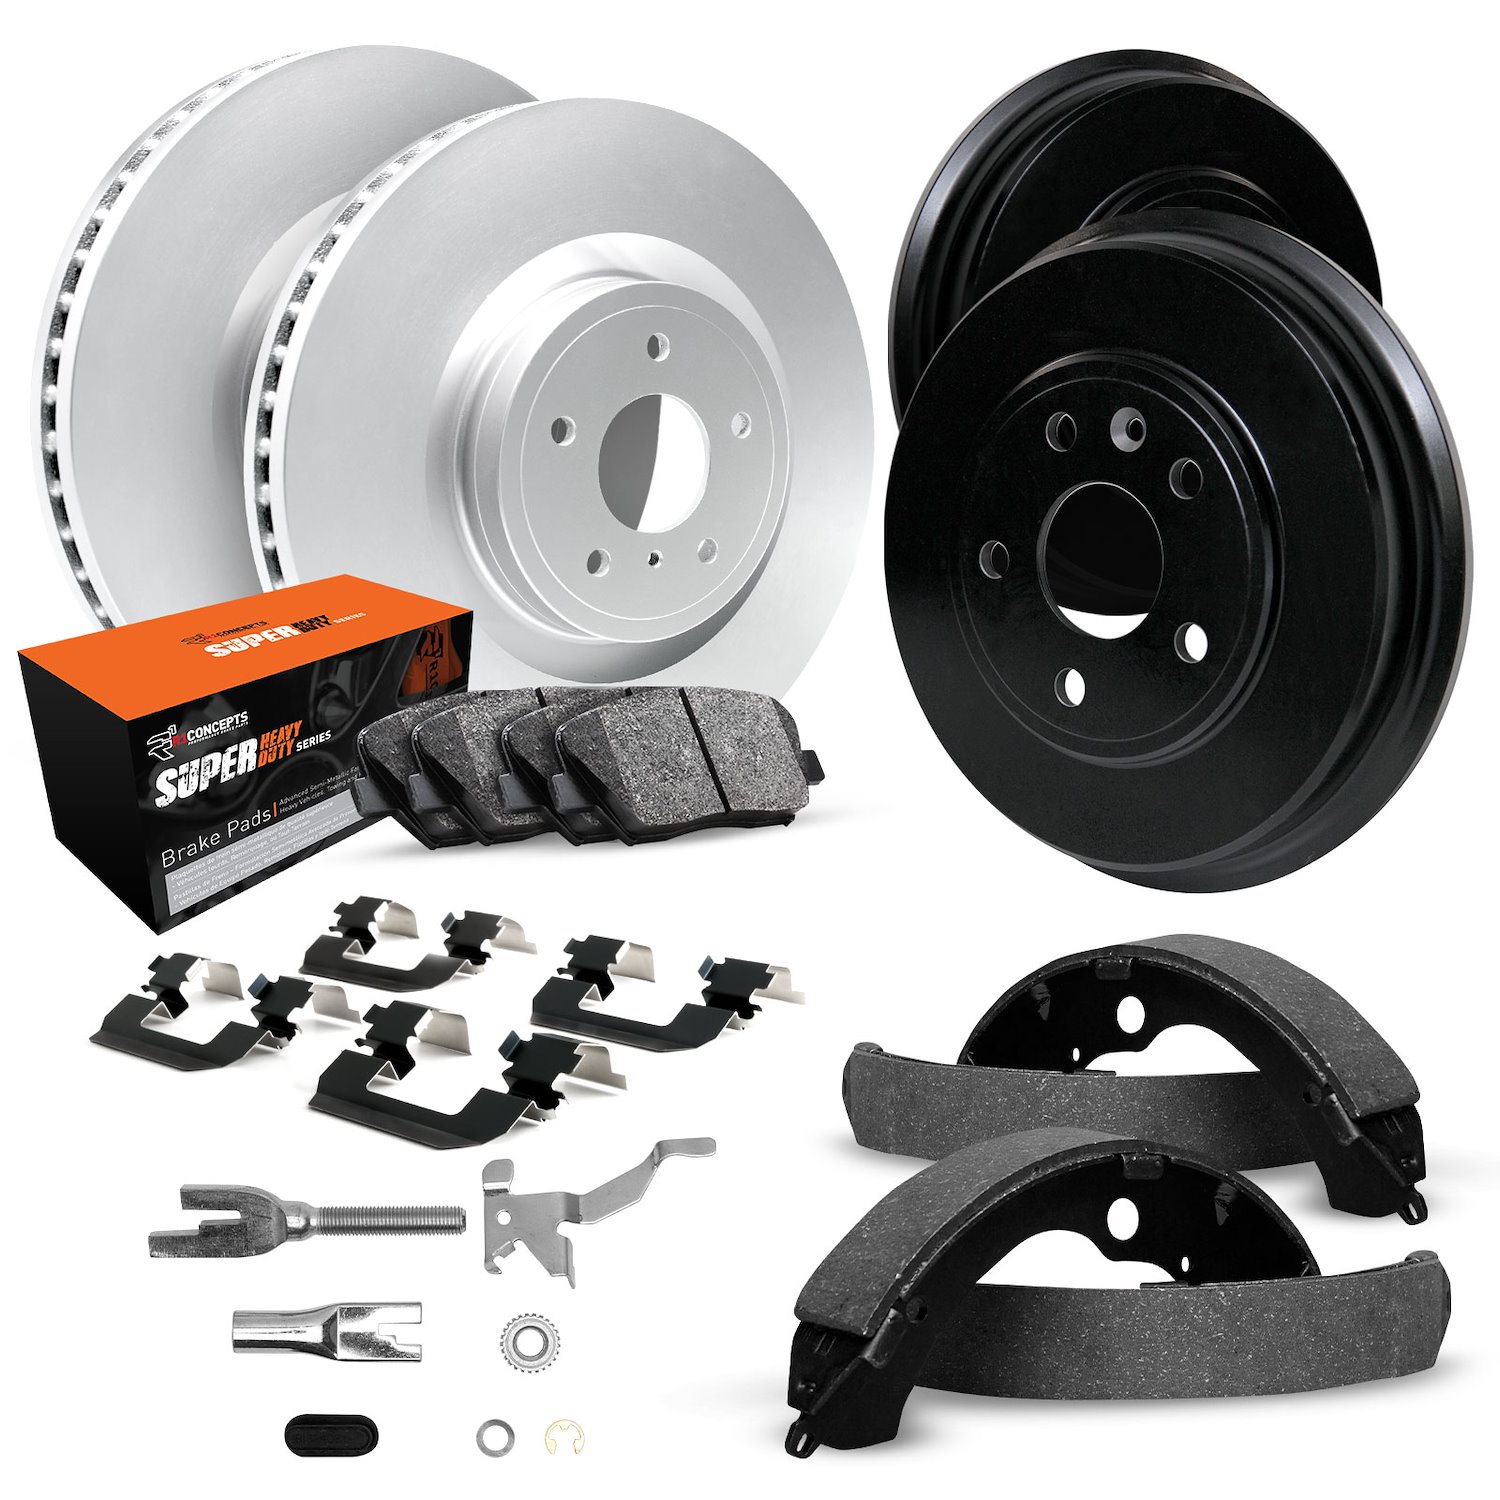 GEO-Carbon Brake Rotor & Drum Set w/Super-Duty Pads, Shoes, Hardware/Adjusters, 1991-1993 GM, Position: Front & Rear